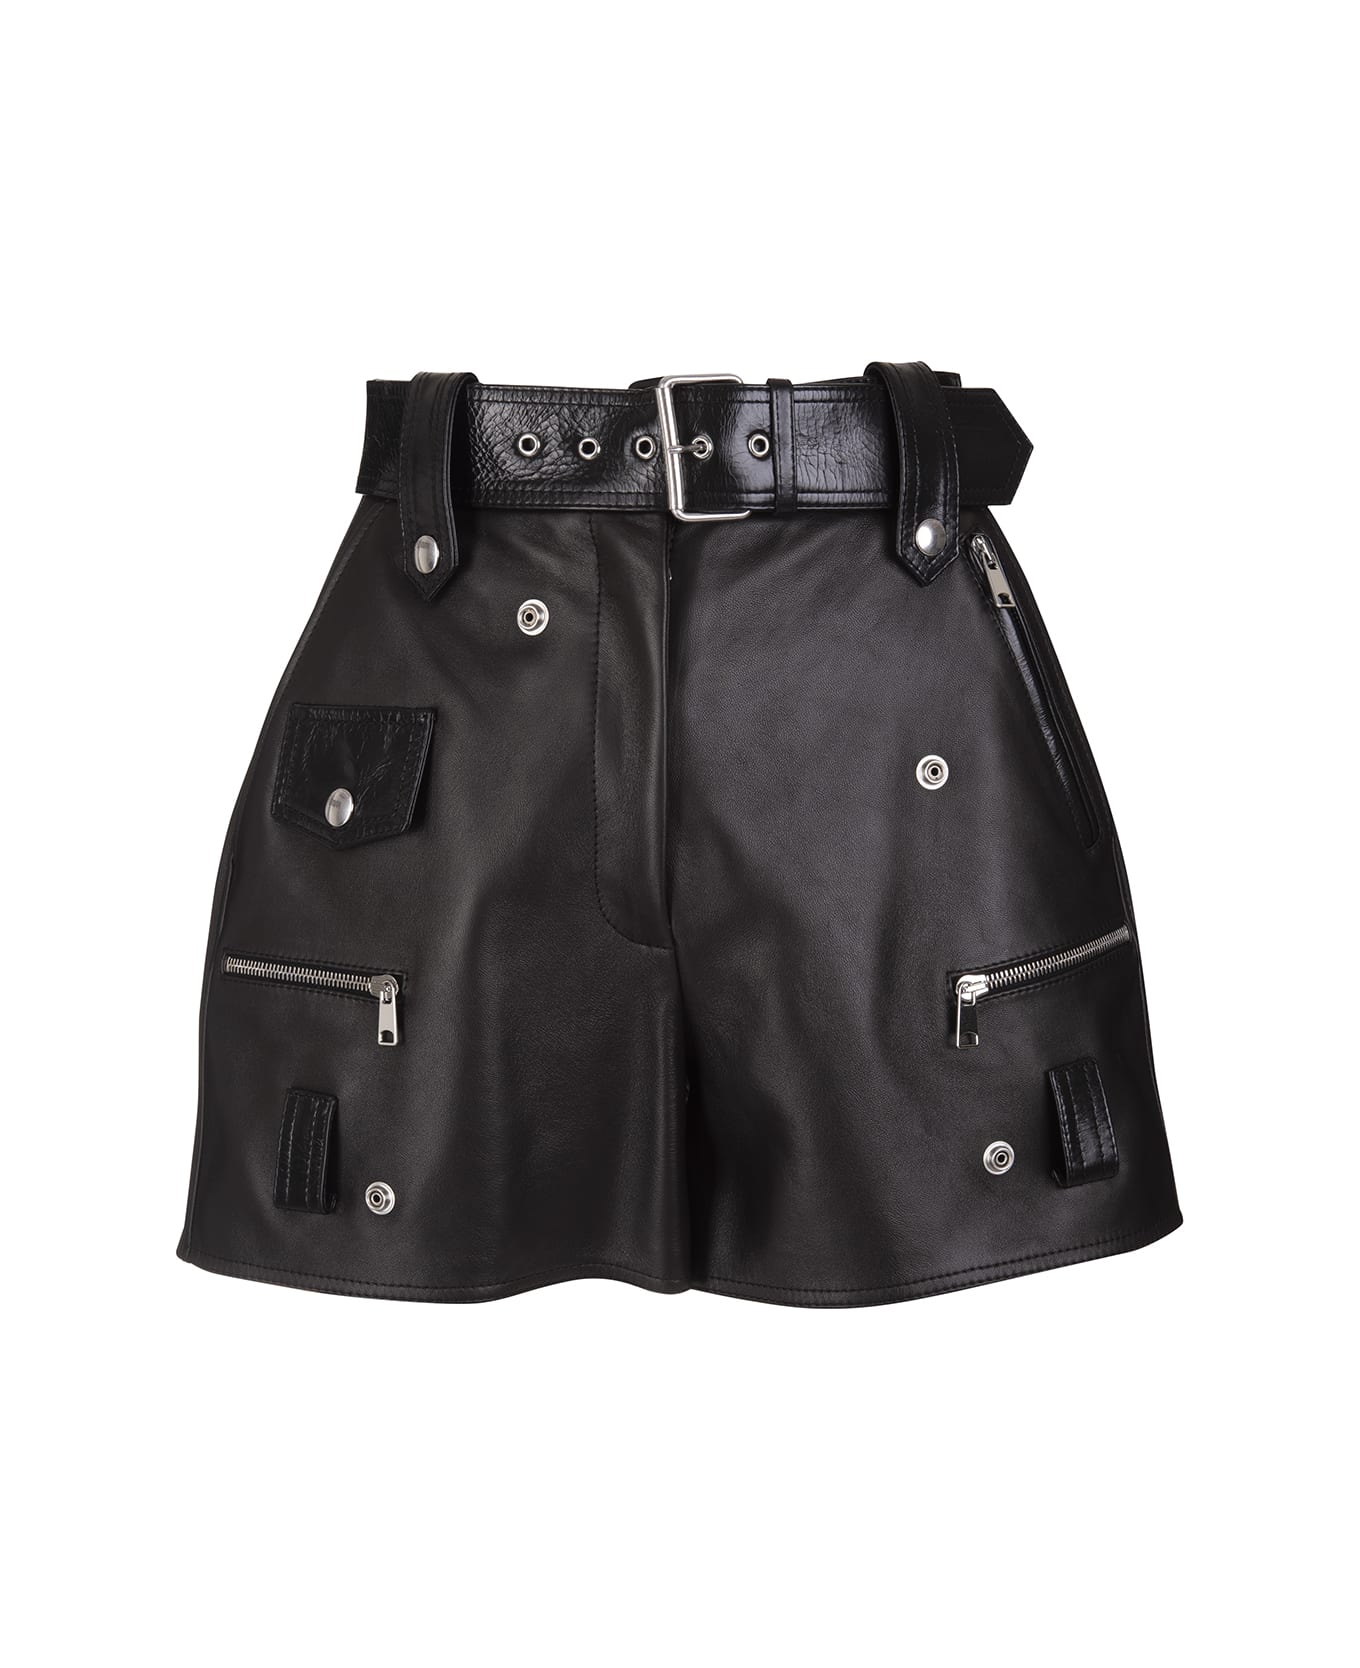 Alexander McQueen Woman Black Leather Shorts With Belt And Studs - Black